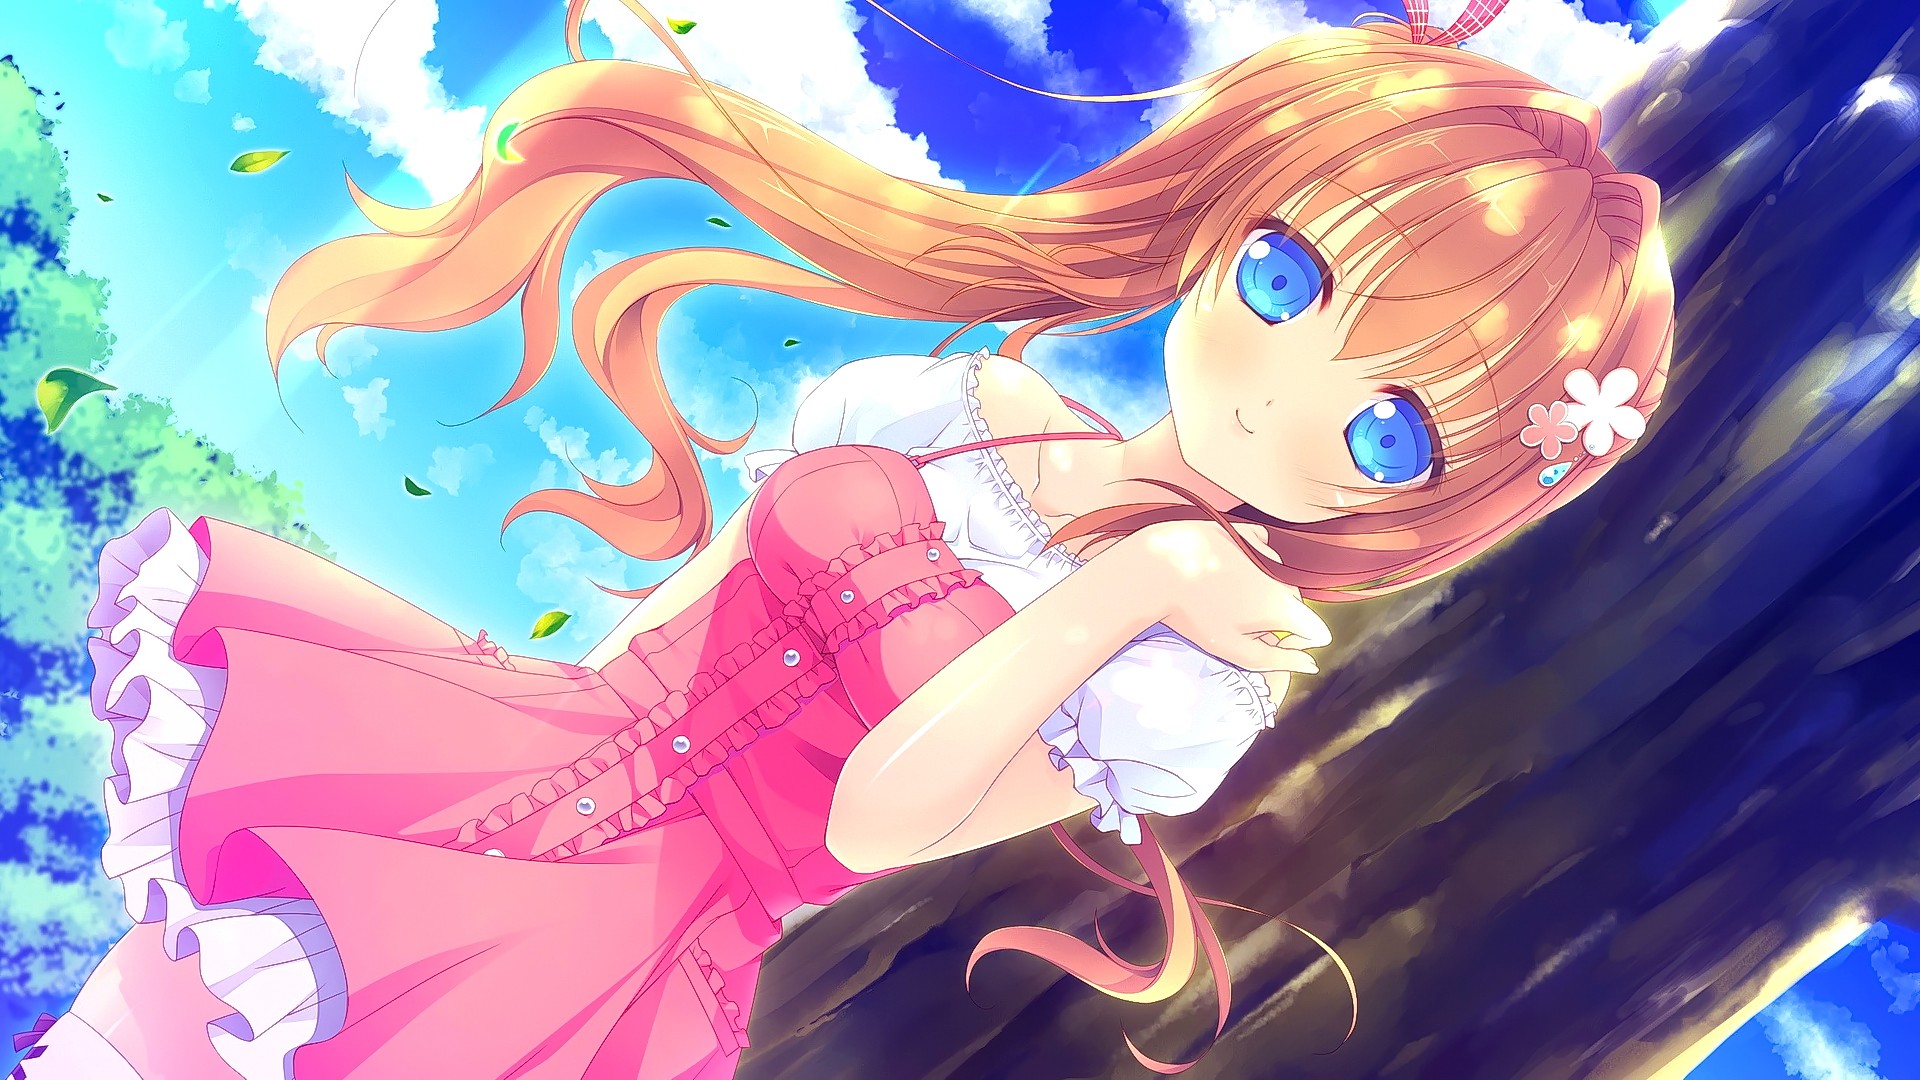 Anime 1920x1080 anime anime girls blonde long hair blue eyes flowers hair ornament smiling looking at viewer pink dress dress pink clothing